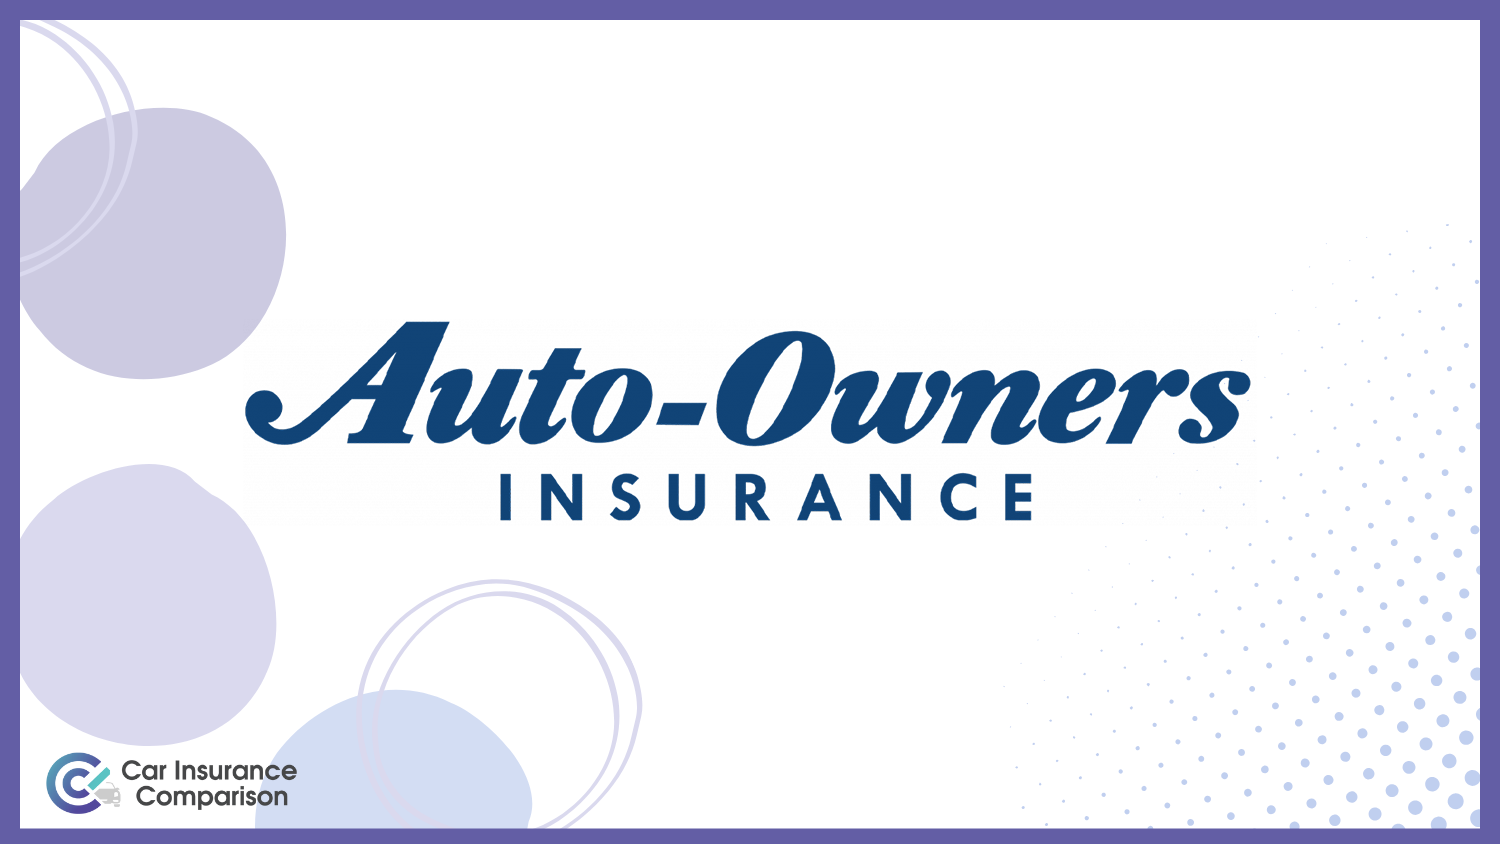 Auto-Owners: Best Car Insurance Companies for Drivers With Speeding Tickets